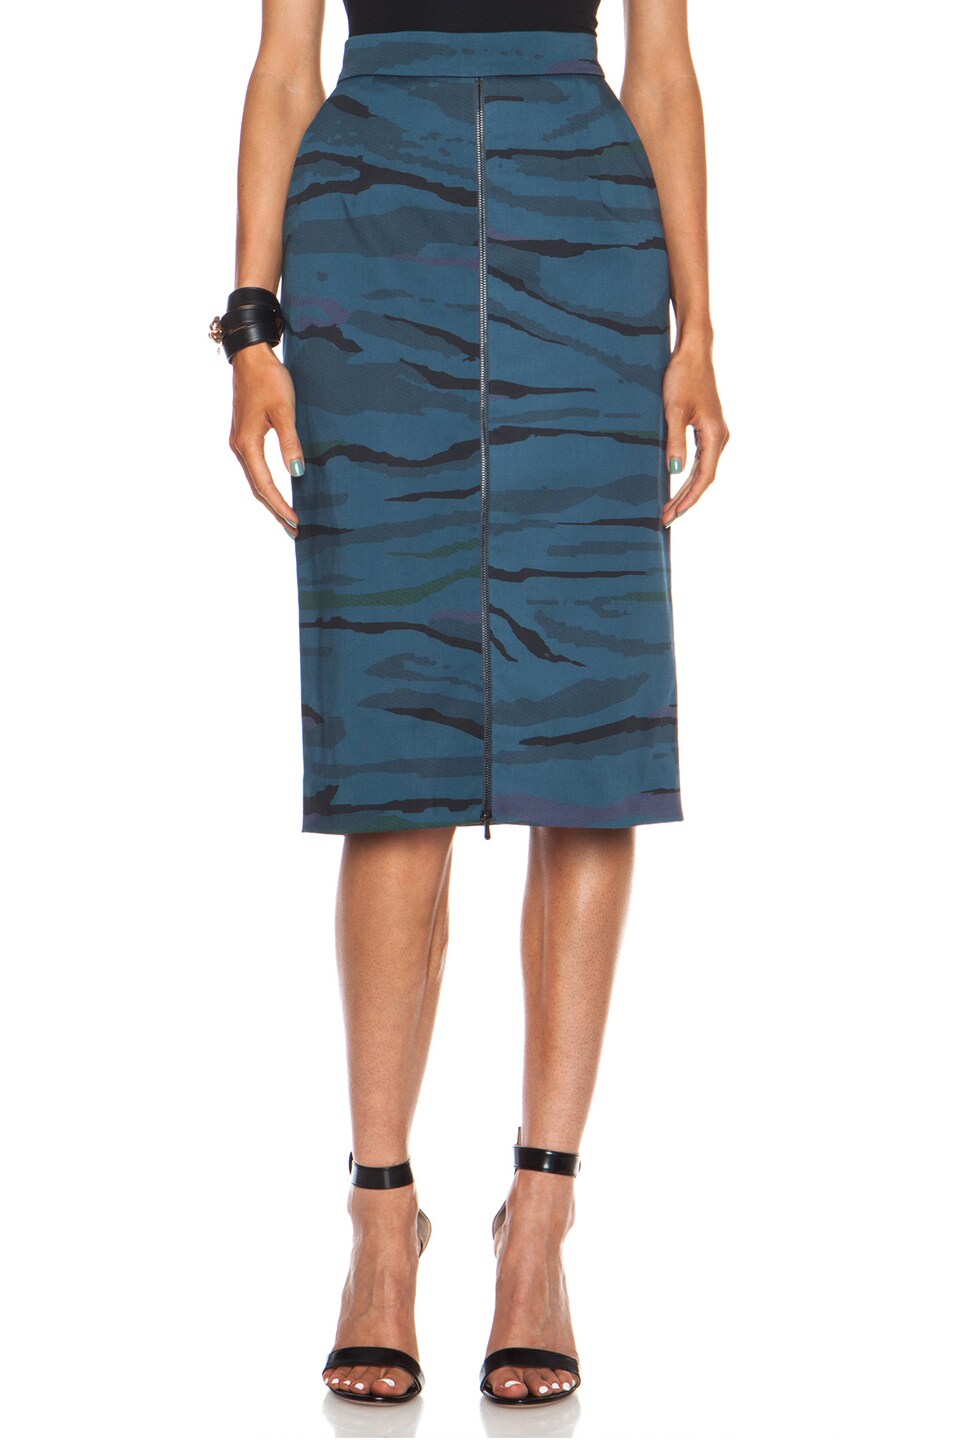 Image 1 of Preen by Thornton Bregazzi Janet Cotton-Blend Skirt in Navy Camouflage